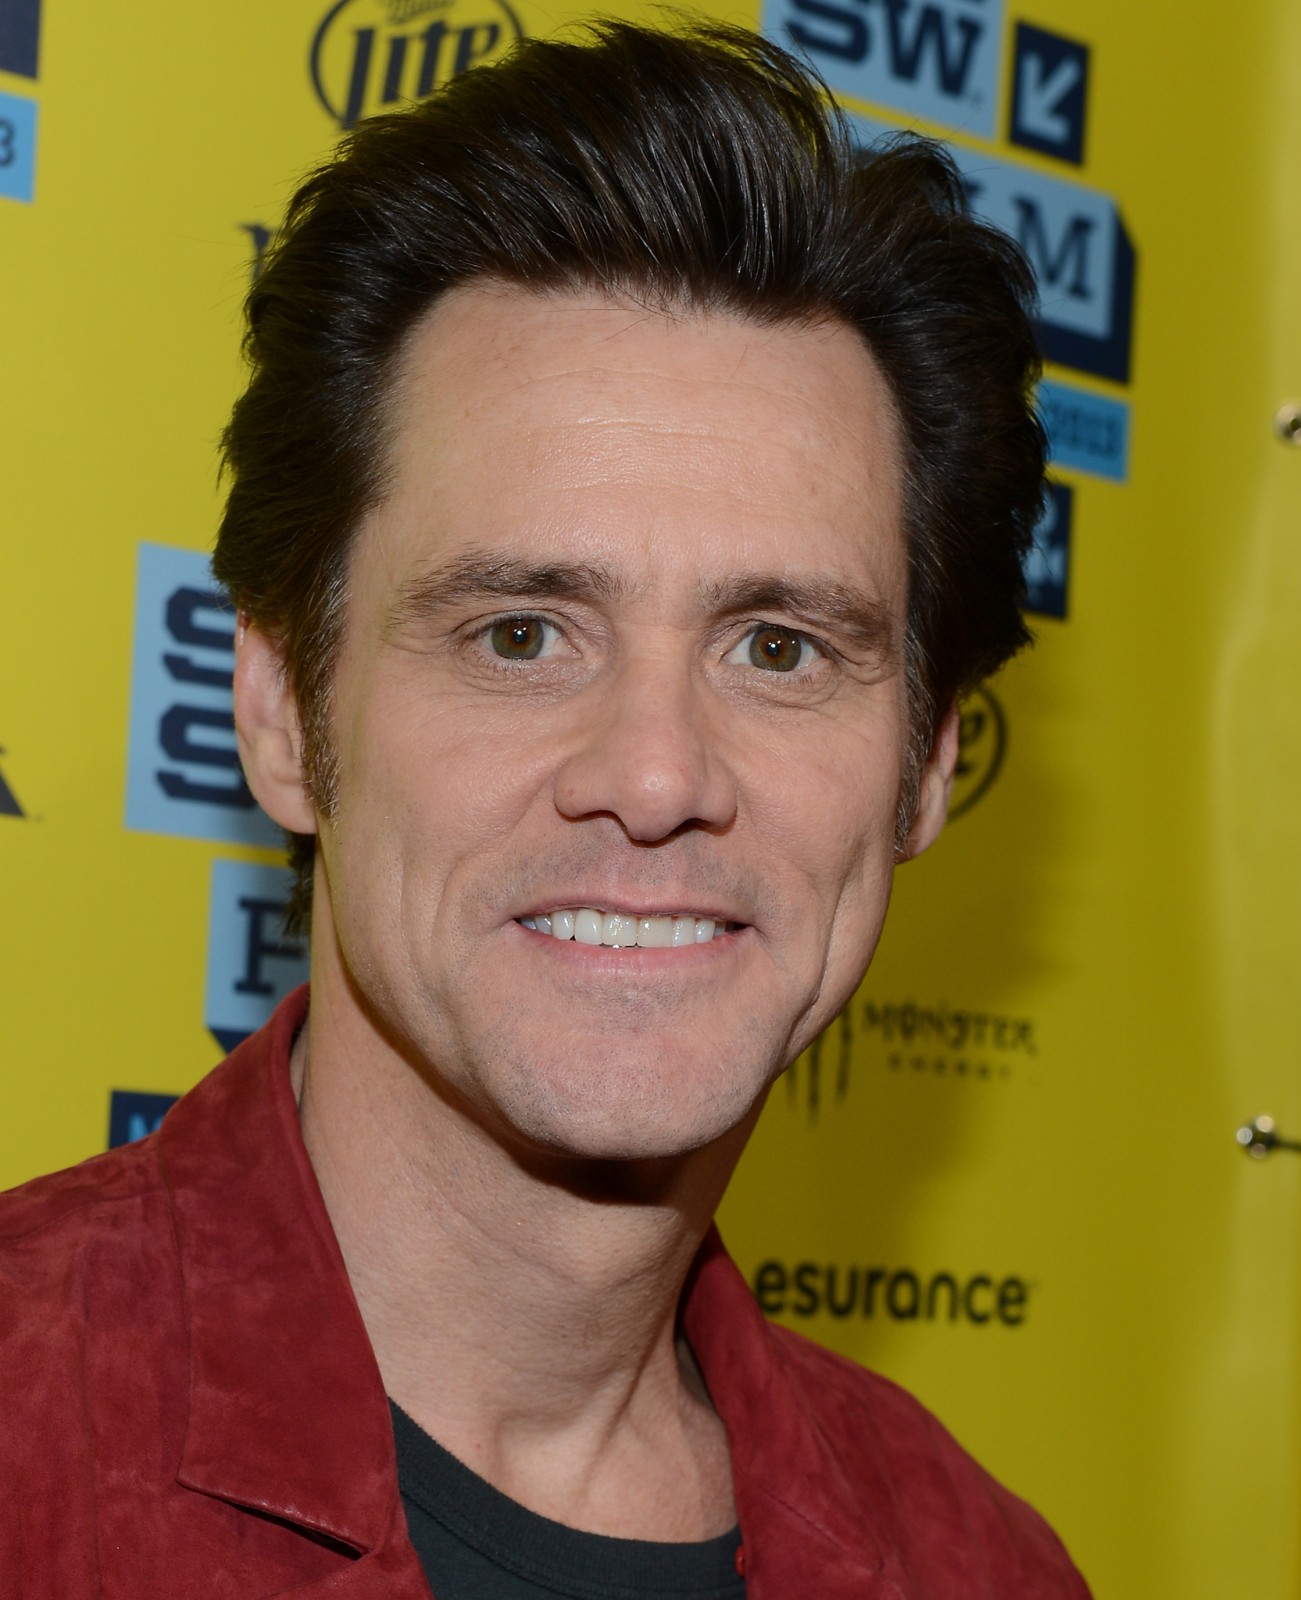 Jim Carrey is O+, but his father was O-, so he is OO+-